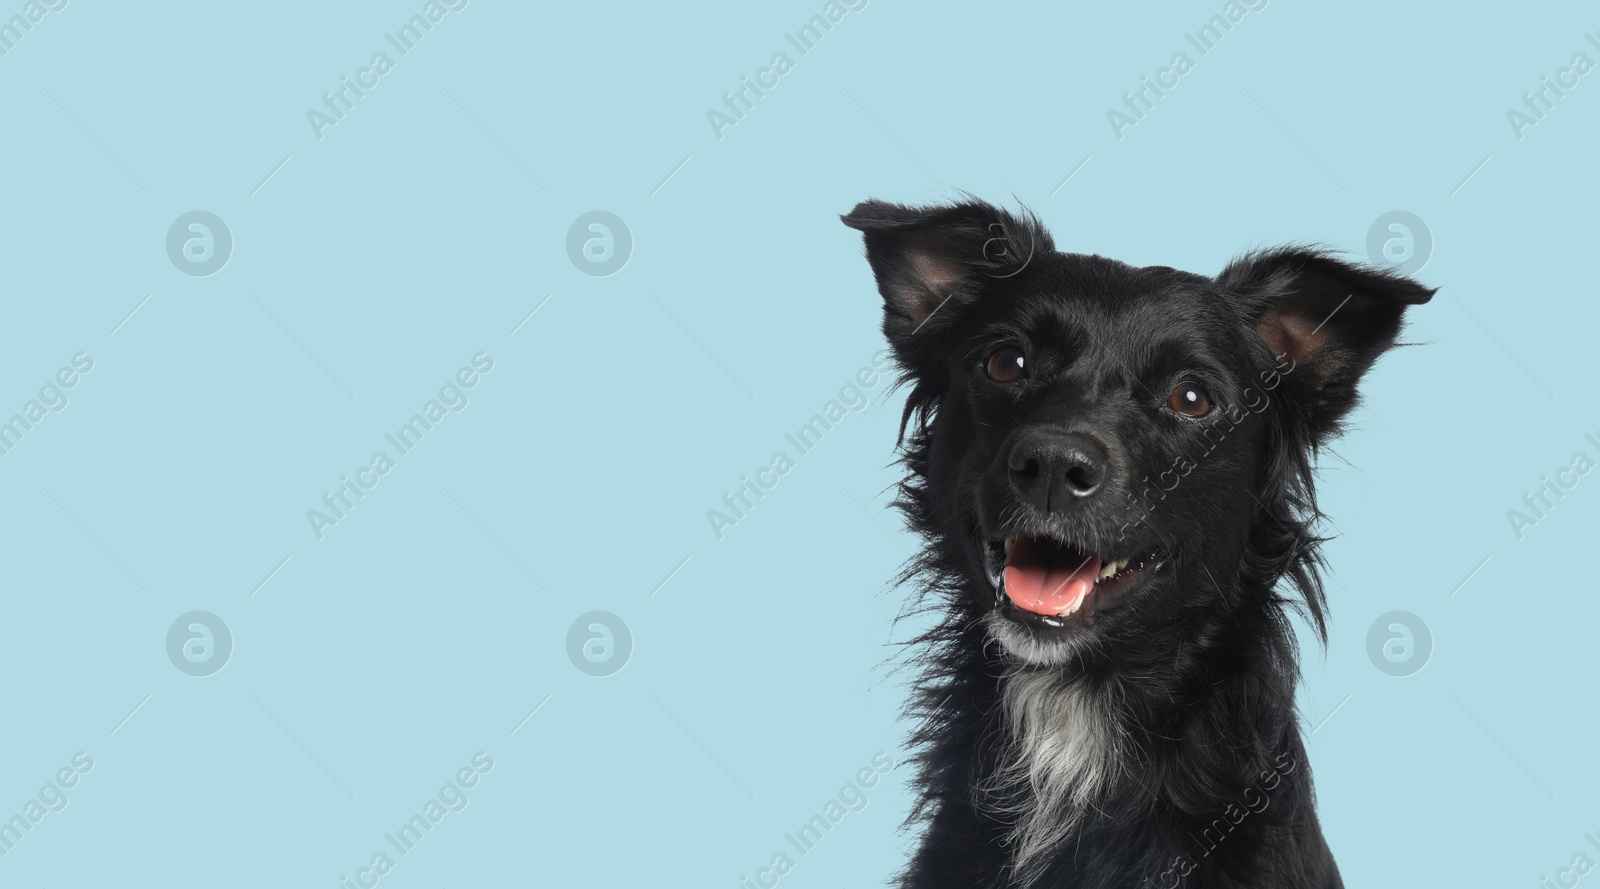 Image of Happy pet. Cute long haired dog smiling on pale light blue background, space for text. Banner design